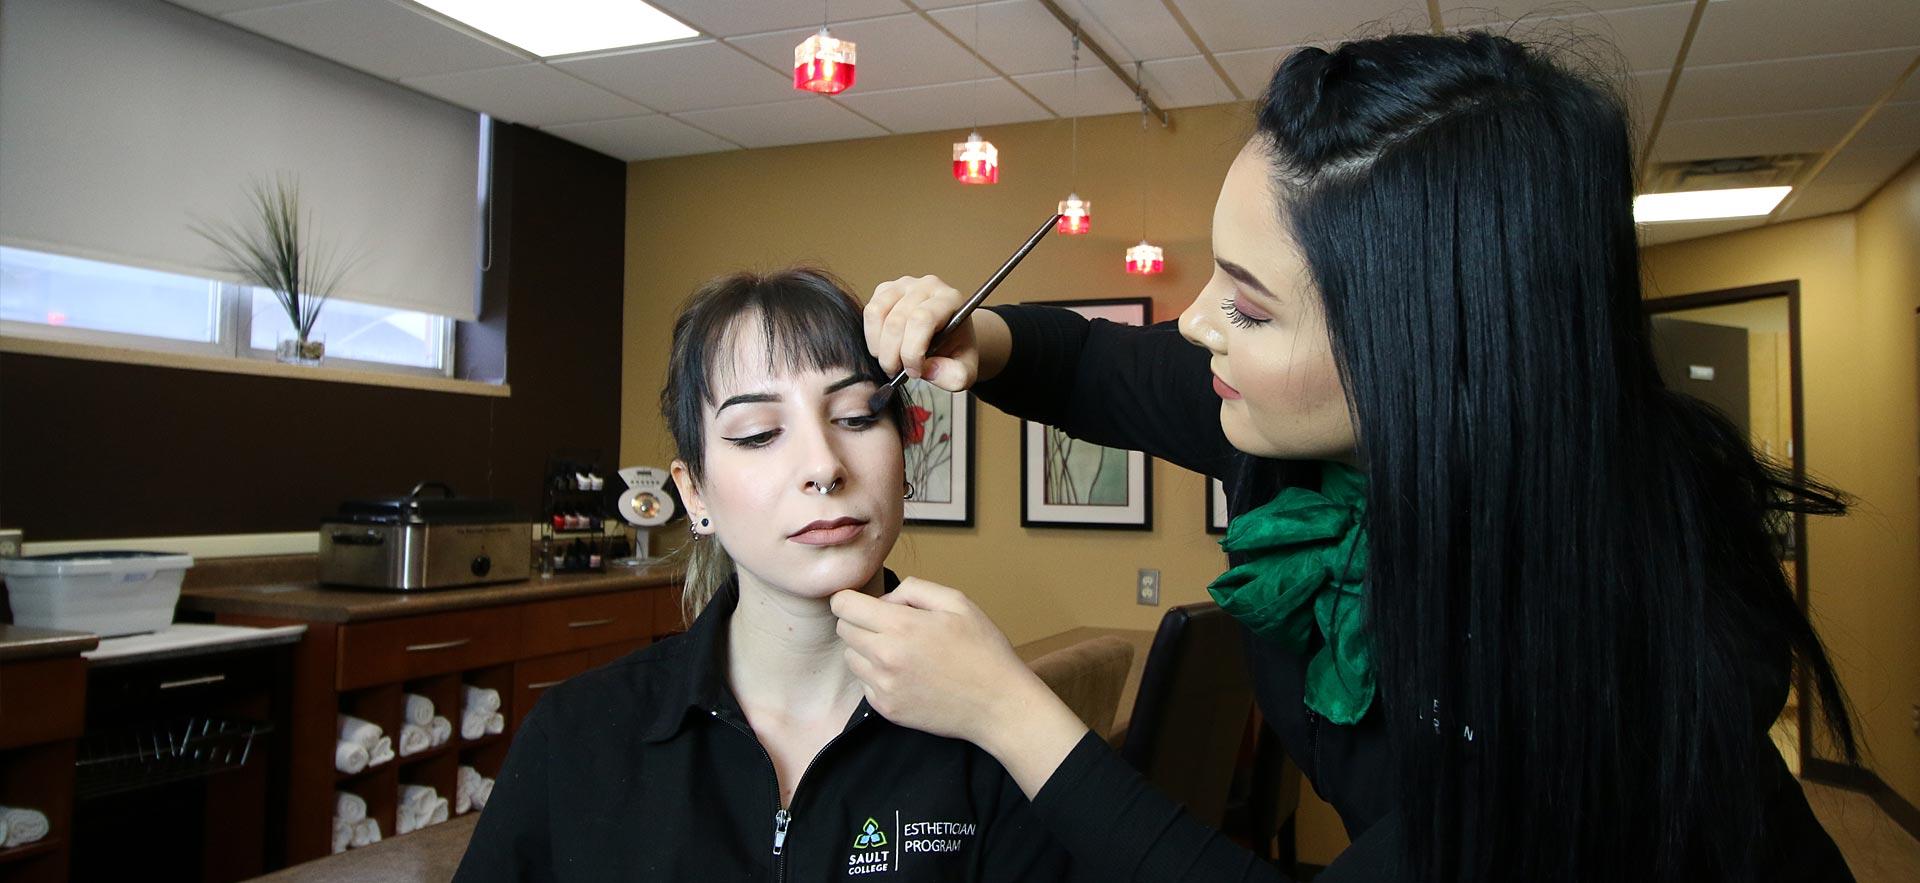 One female Esthetician student applies make-up to another Esthetician student in the Sault College salon spa. 